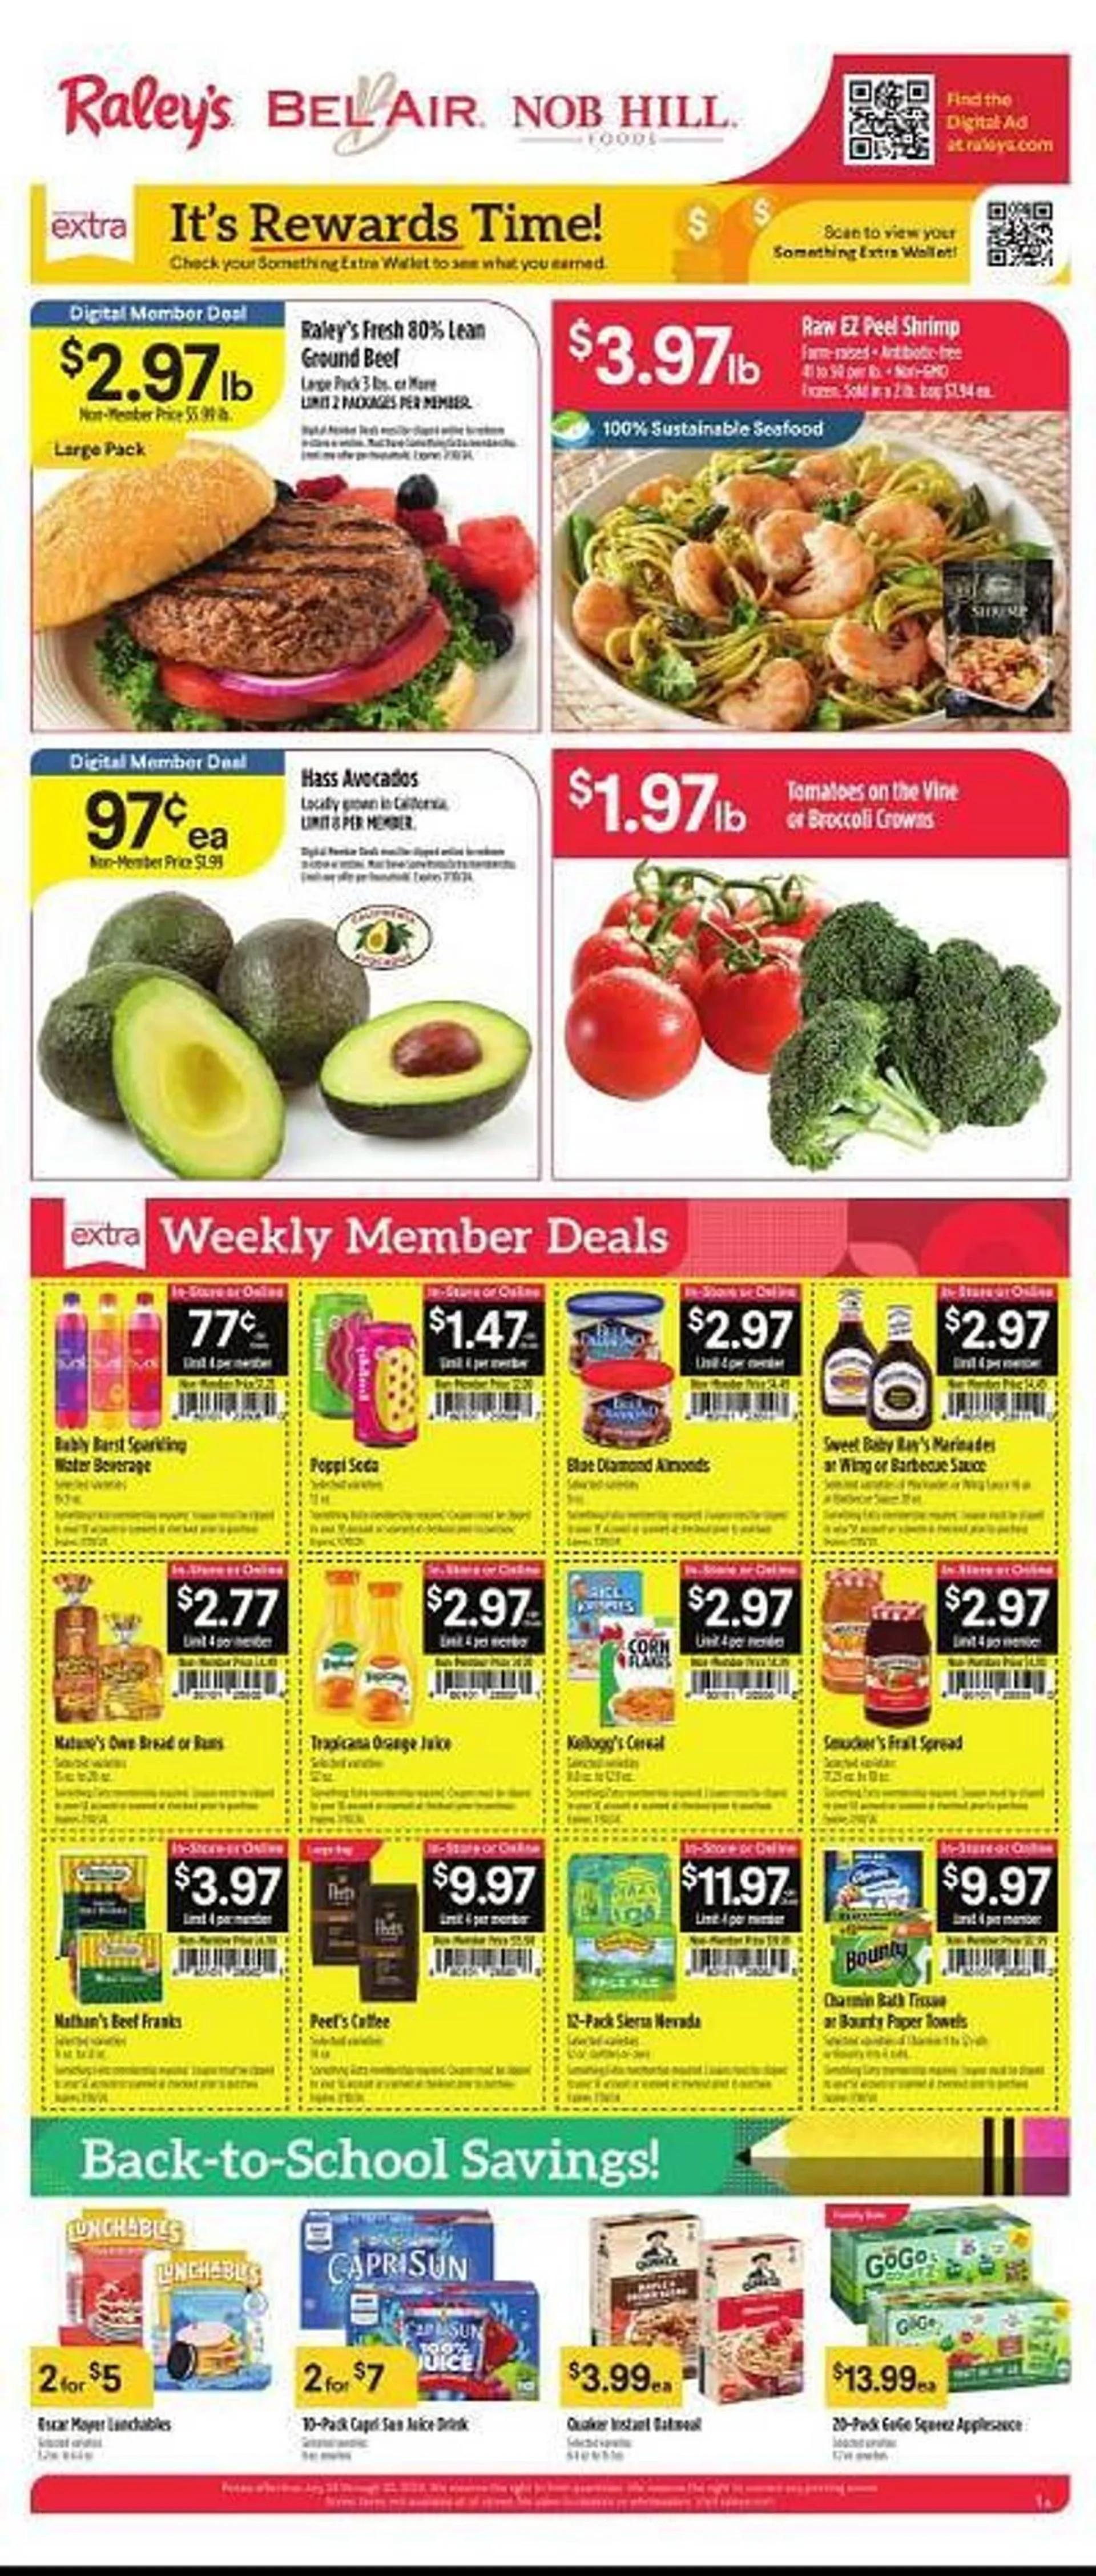 Bel Air Markets Weekly Ad - 1